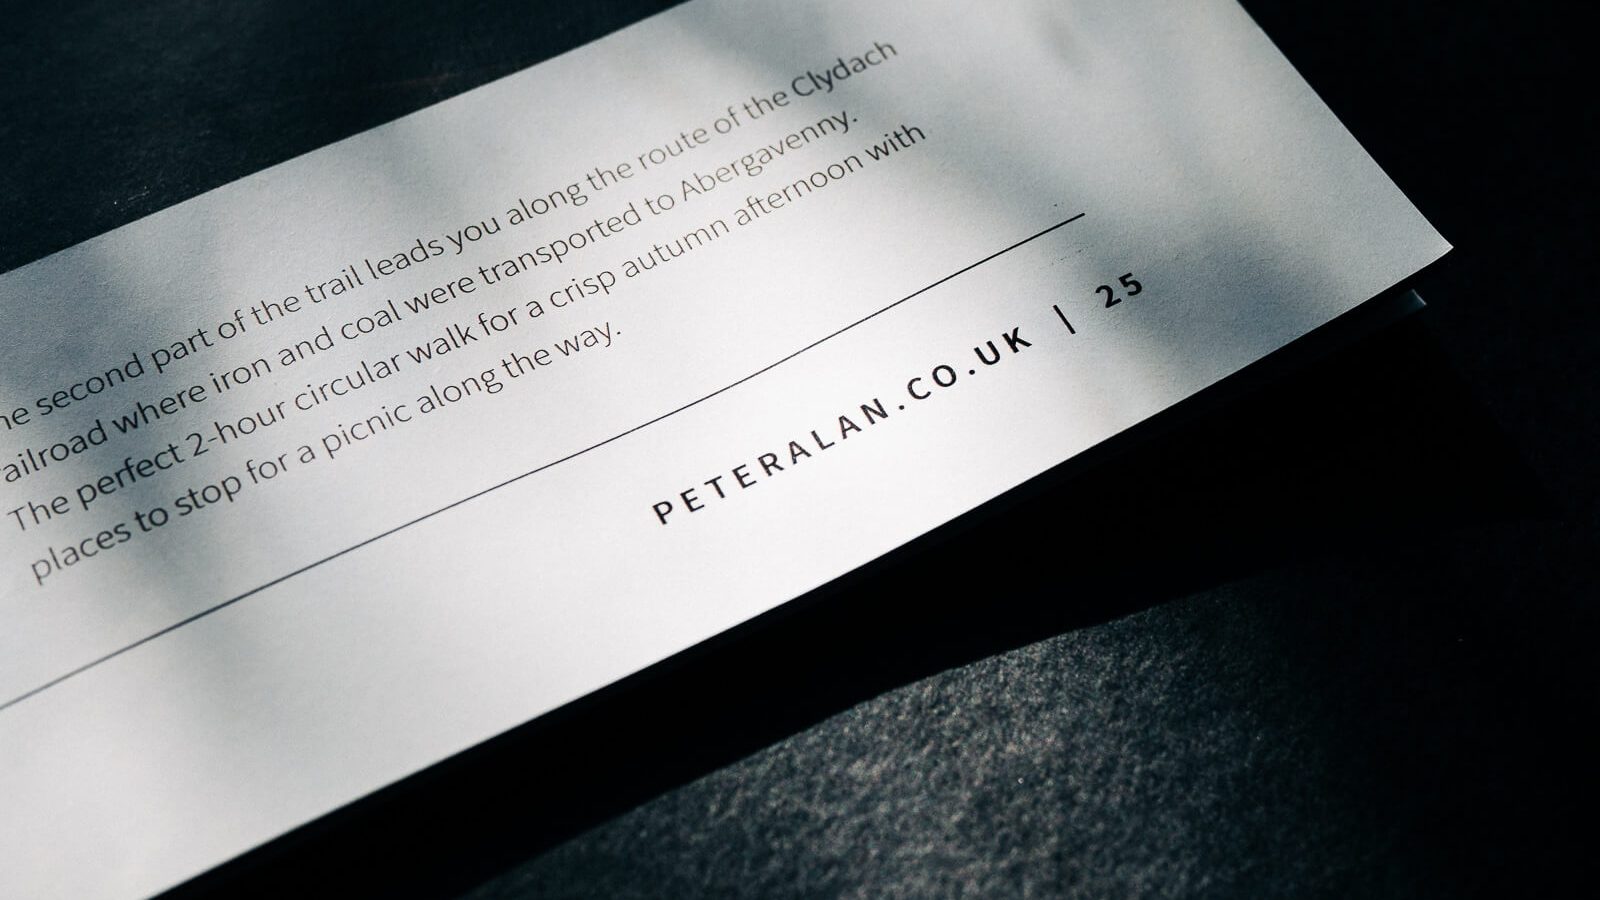 A strip of paper with text lies on a textured dark surface, illuminated by a streak of light, highlighting specific content and a Web Agency Bristol address, 